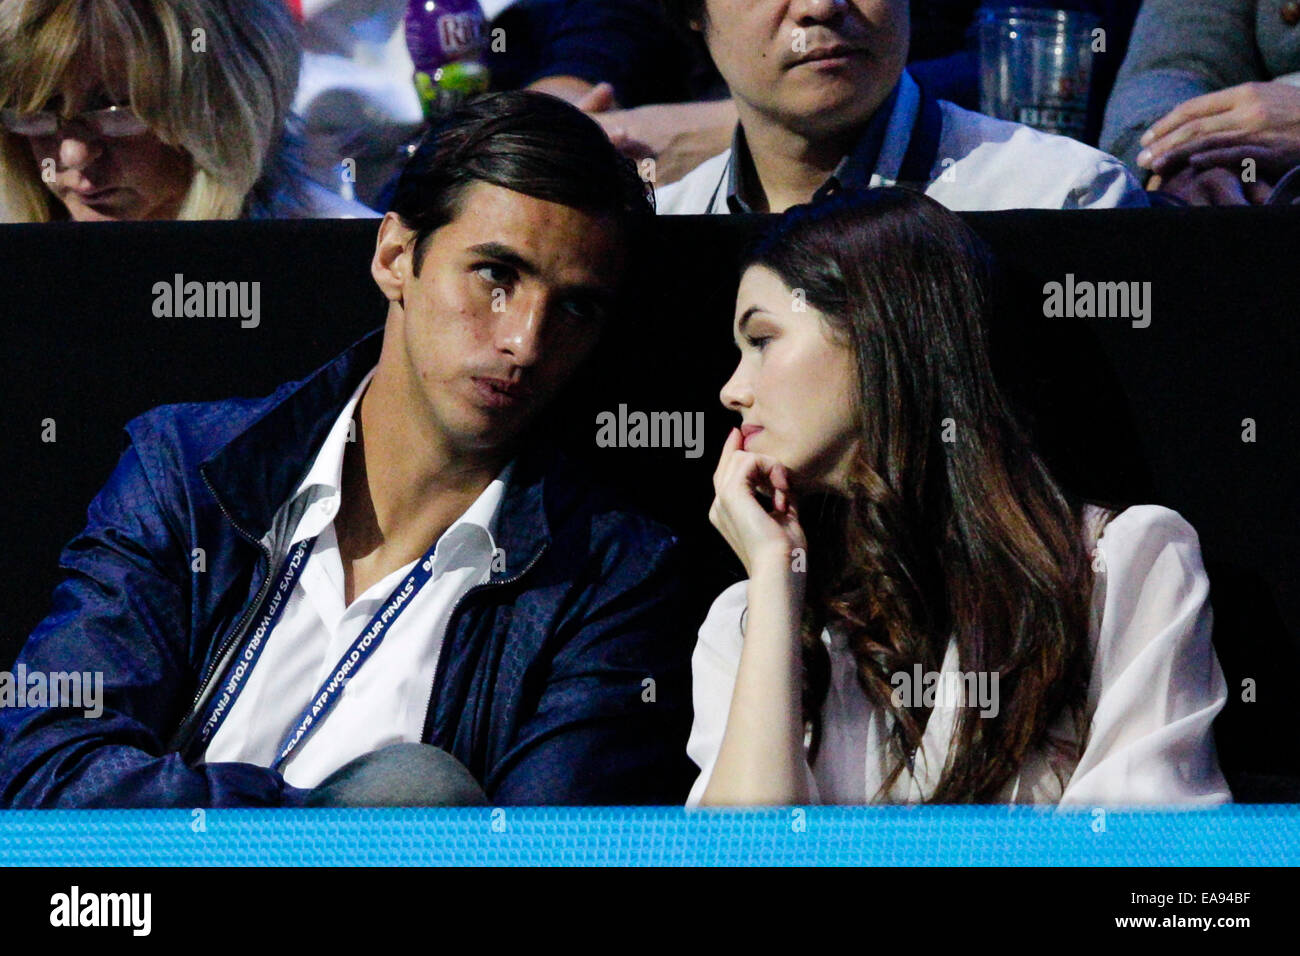 London, UK. 09th Nov, 2014. ATP World Tour Finals. Andy Murray (GBR) versus Kei Nishikori (JPN). Fulham football player Bryan Ruiz watches the action courtside with his partner Credit:  Action Plus Sports/Alamy Live News Stock Photo